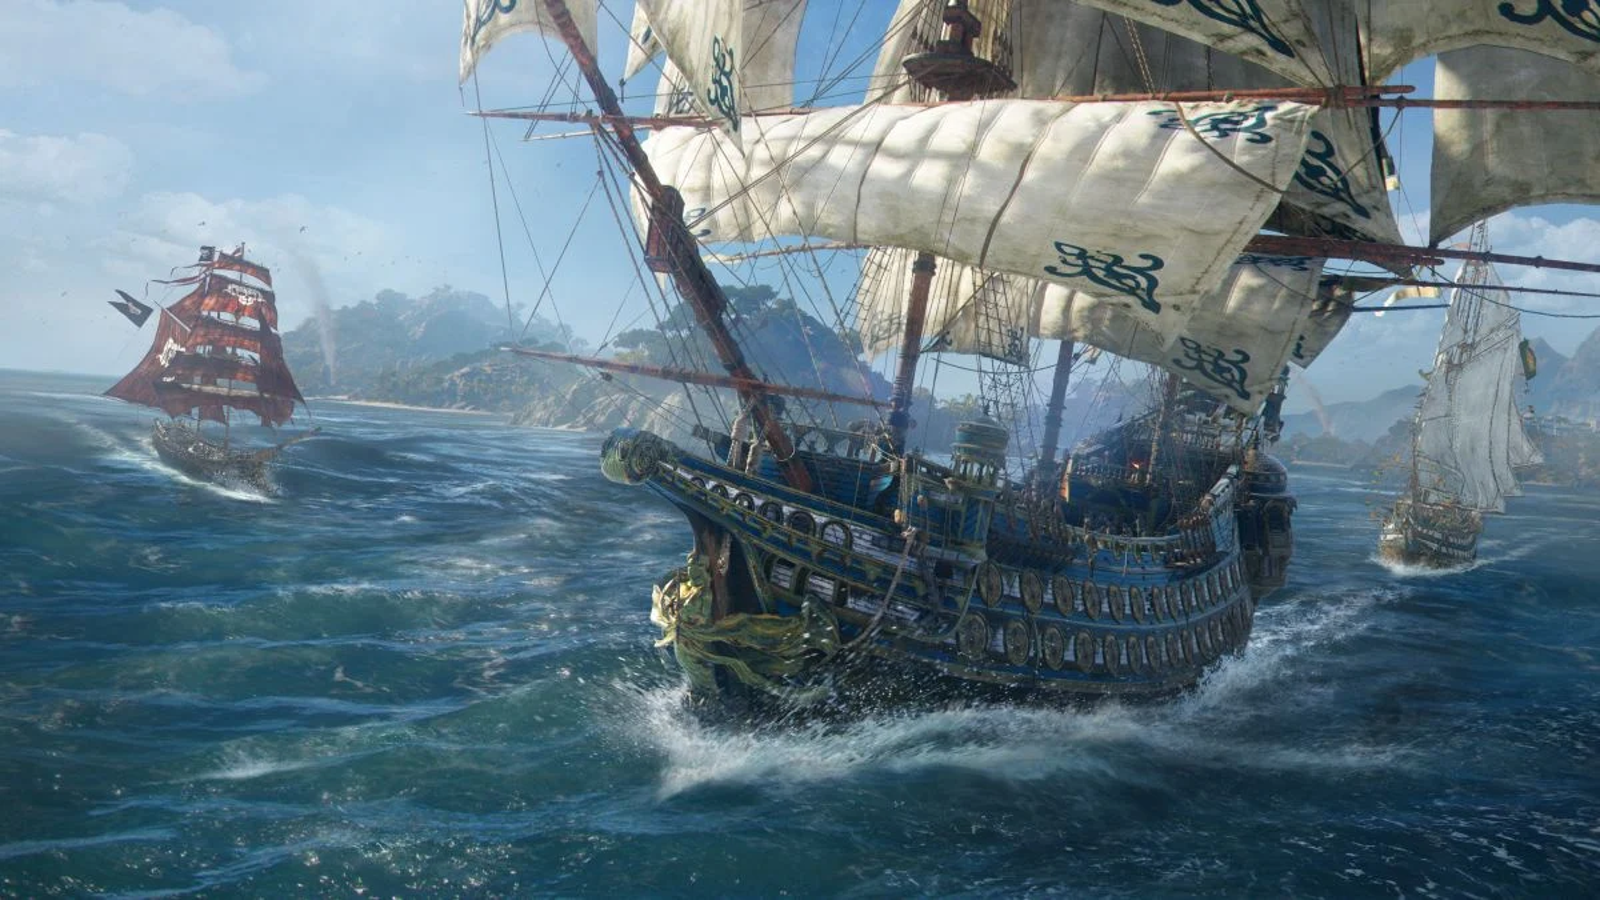 Skull and Bones still a real game, closed beta planned for August